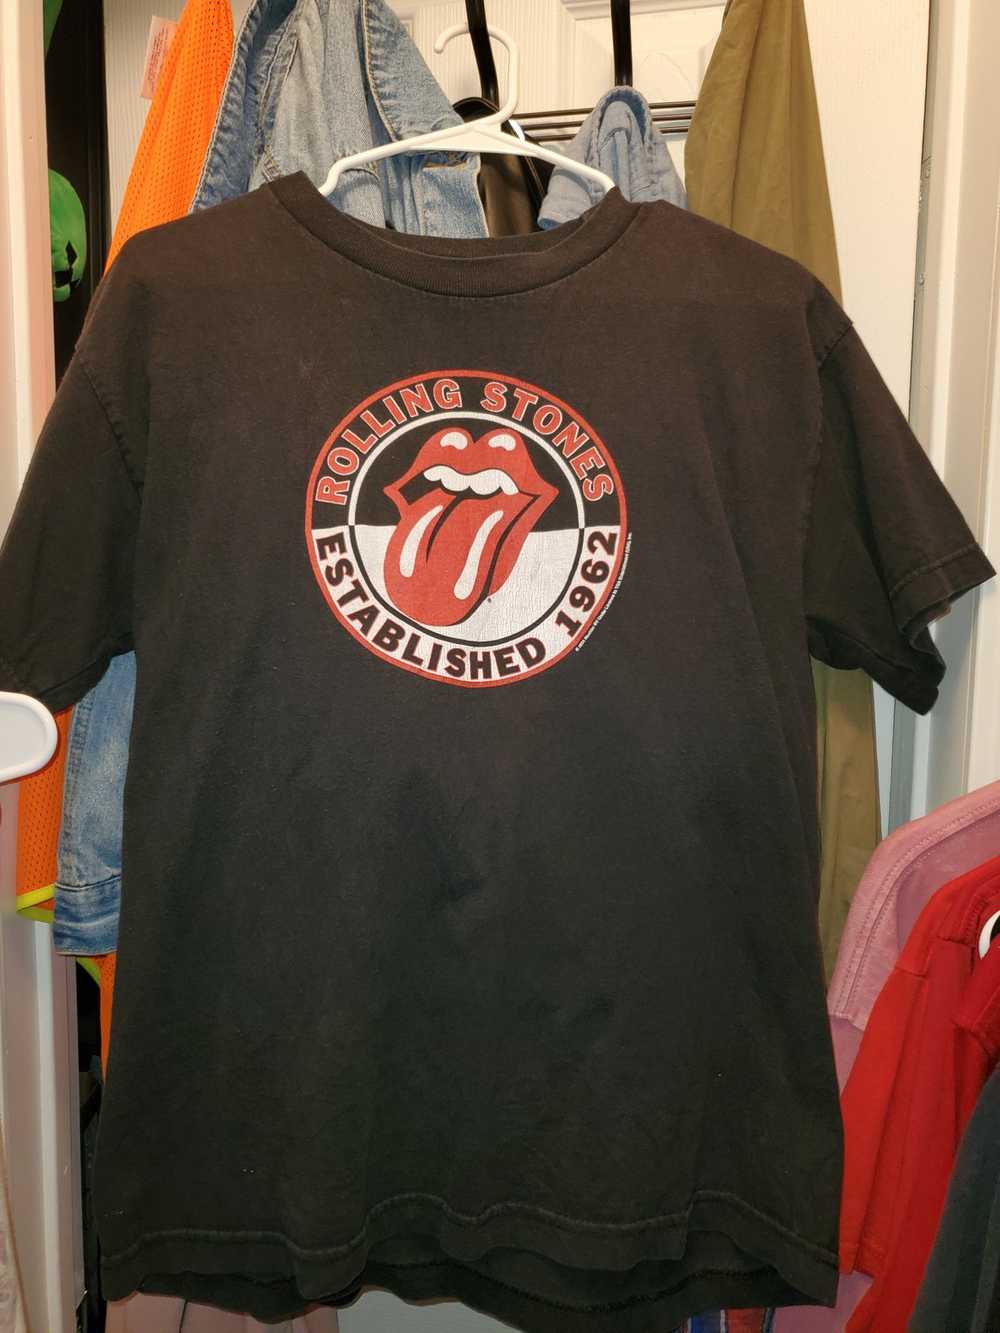 Alstyle Vintage 2004 Rolling stone tee - image 1